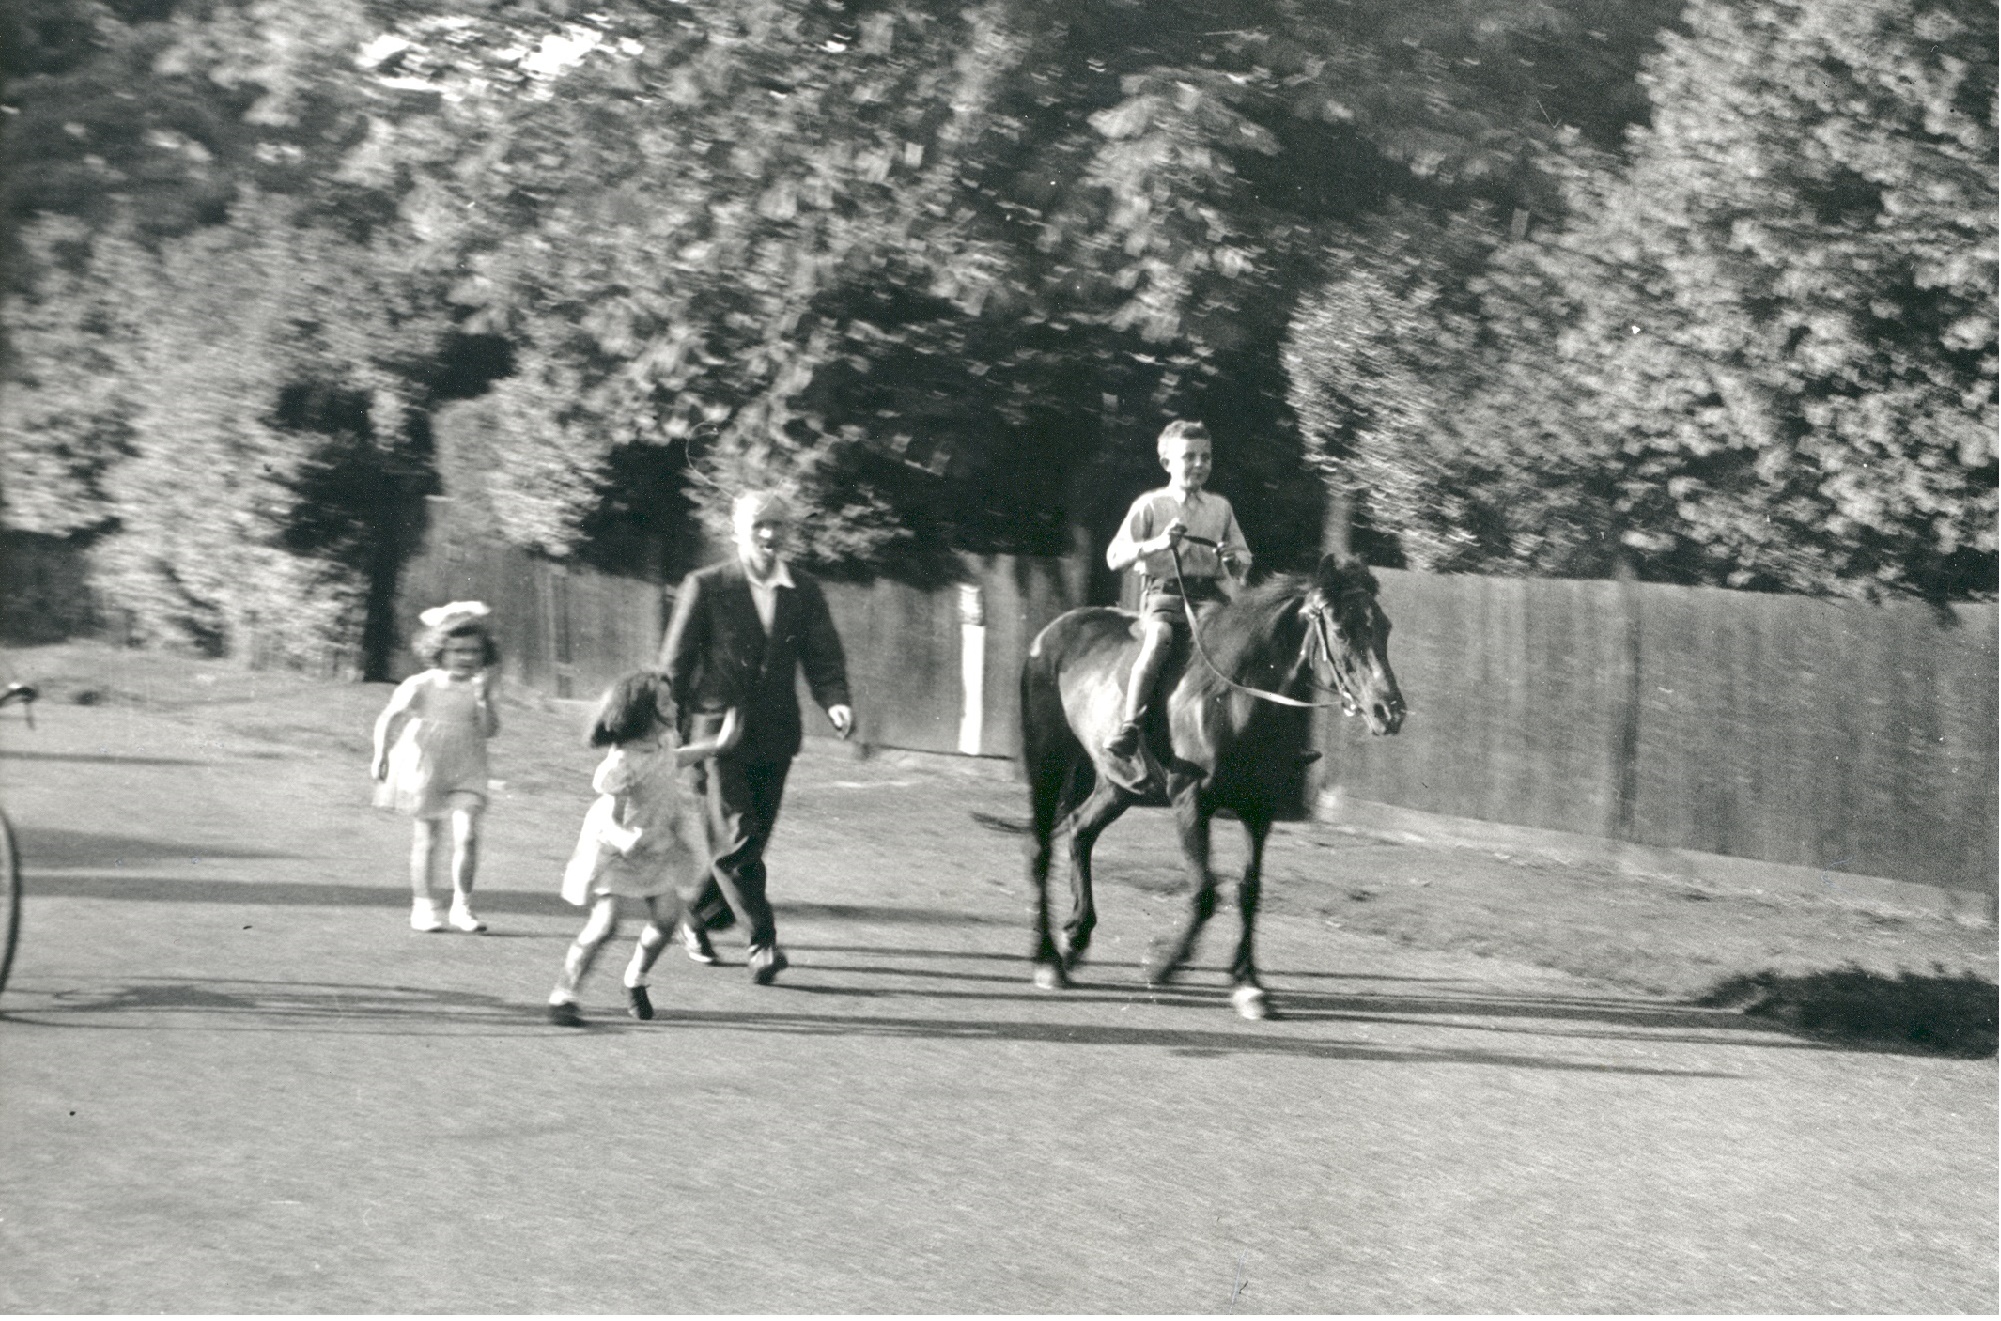 An image of a young boy riding a pony